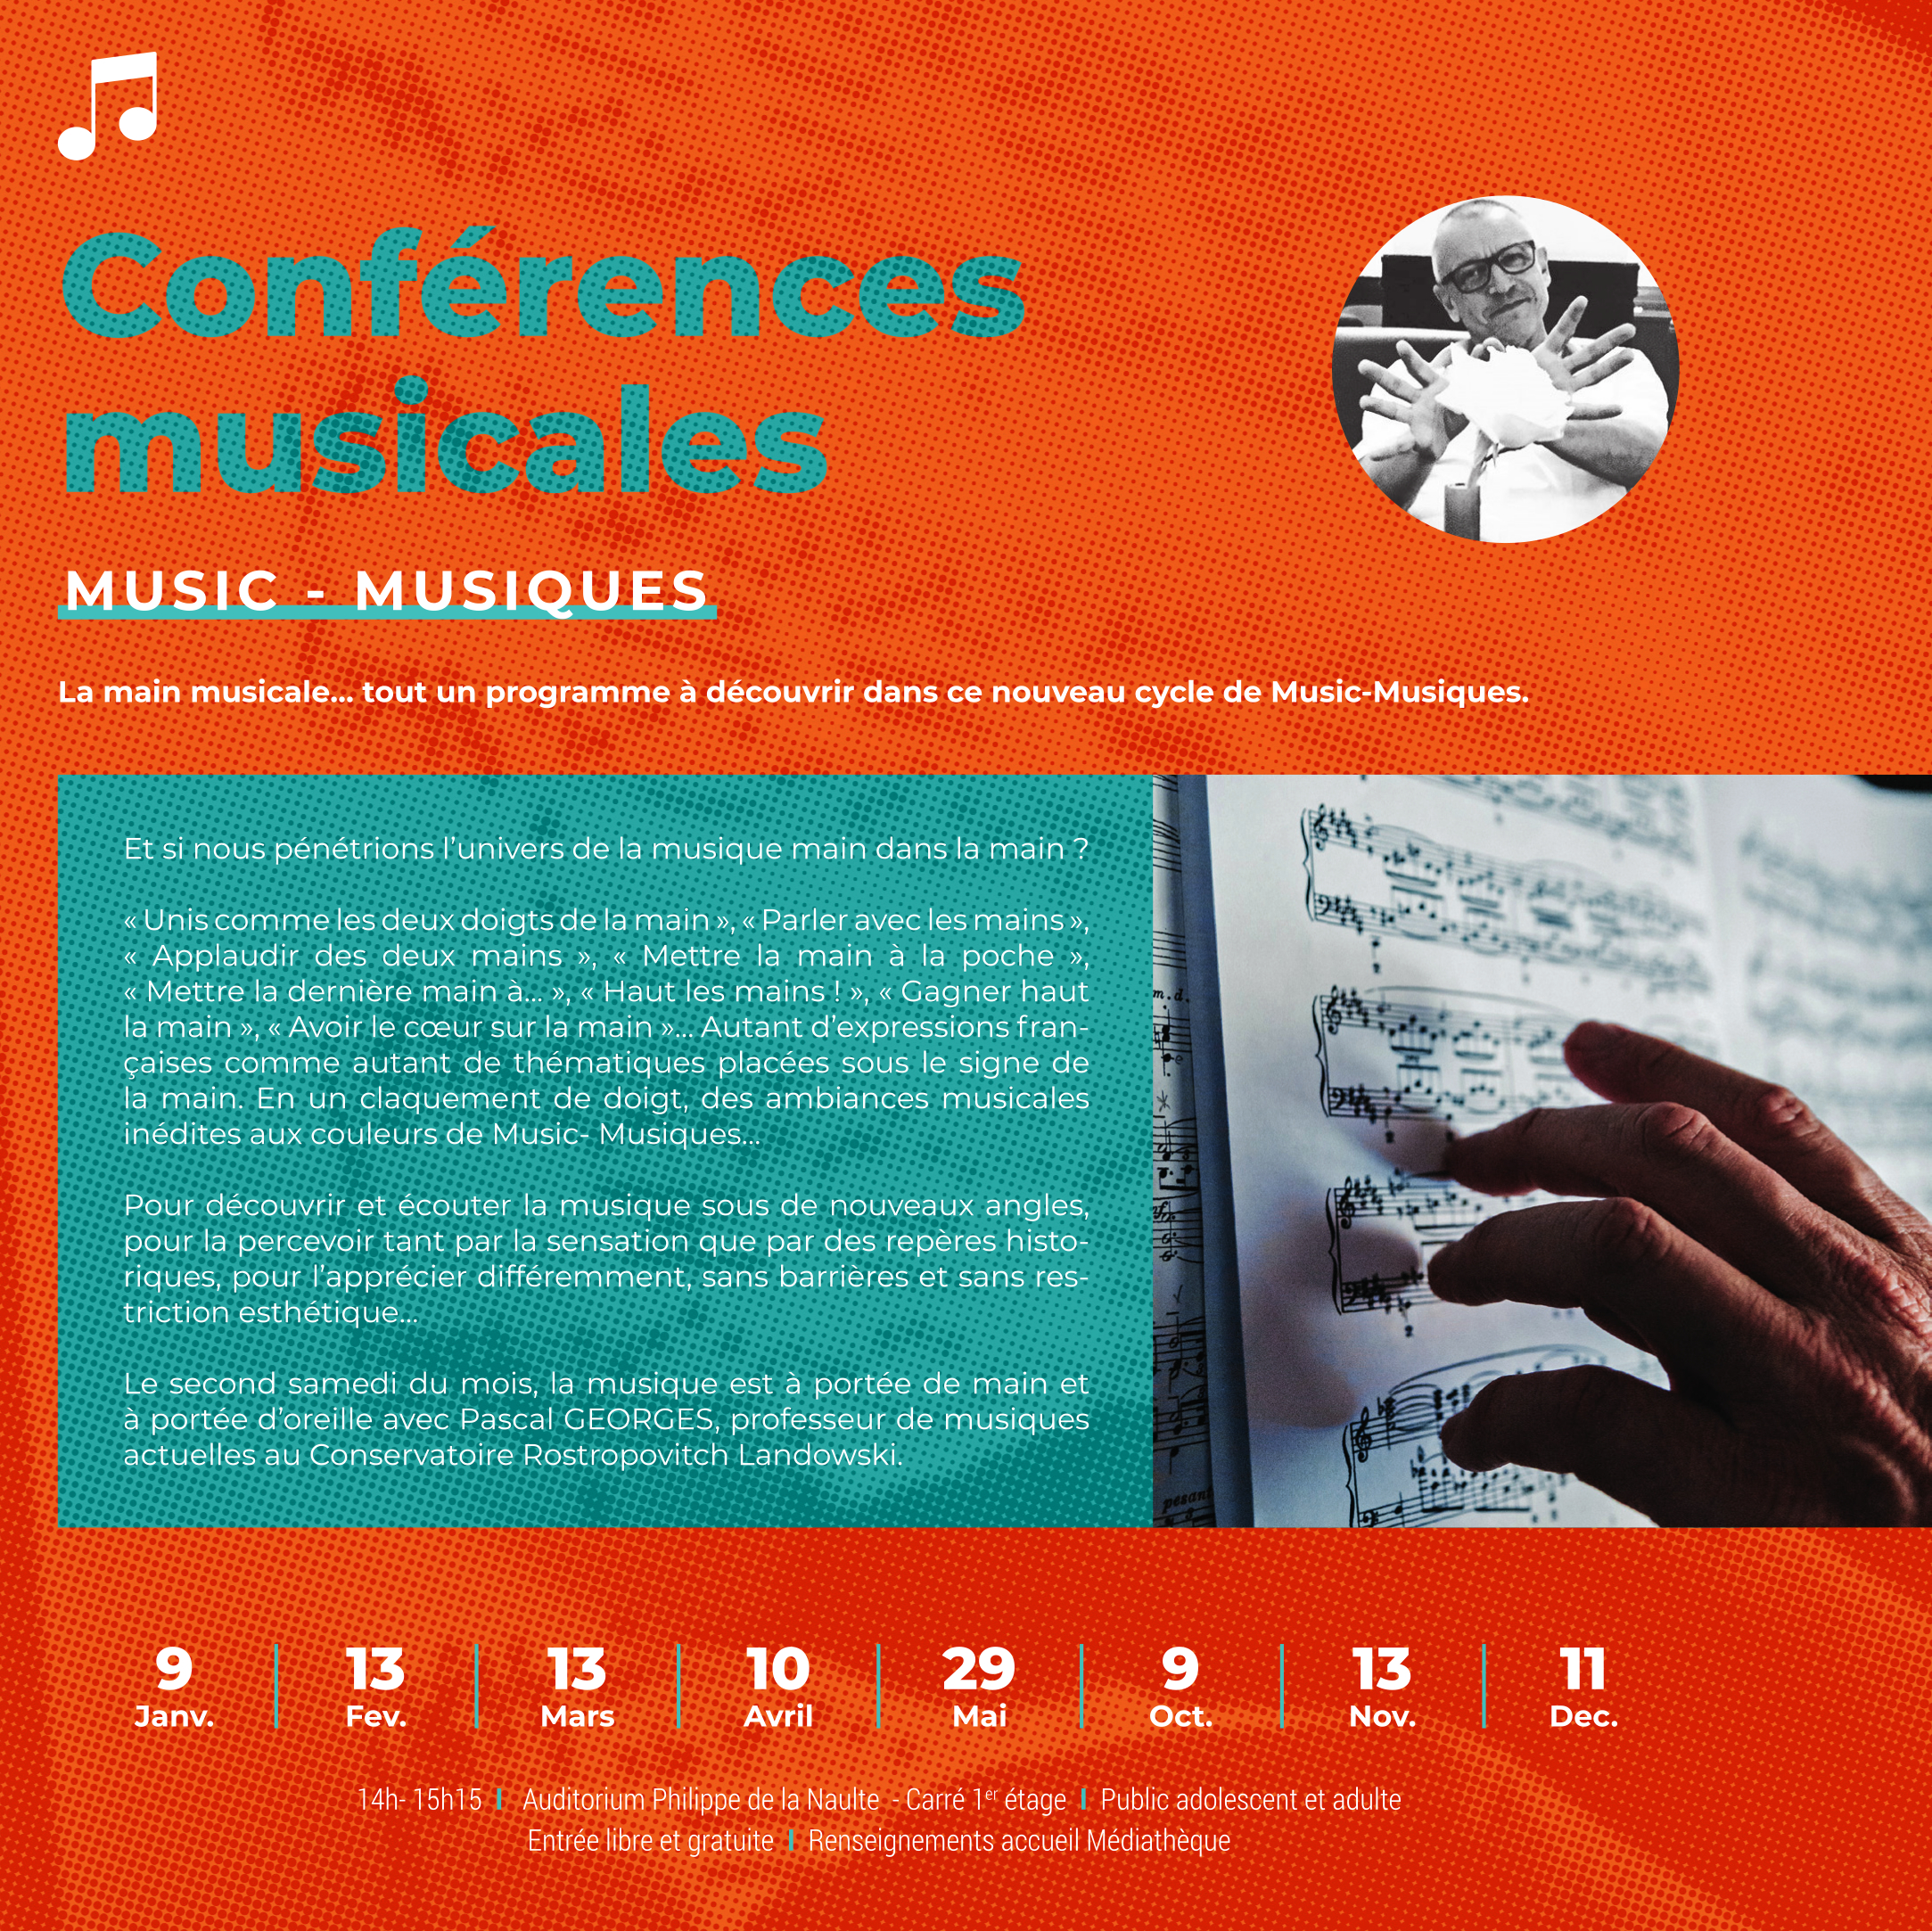 MUSIC MUSIQUES PAGE 16